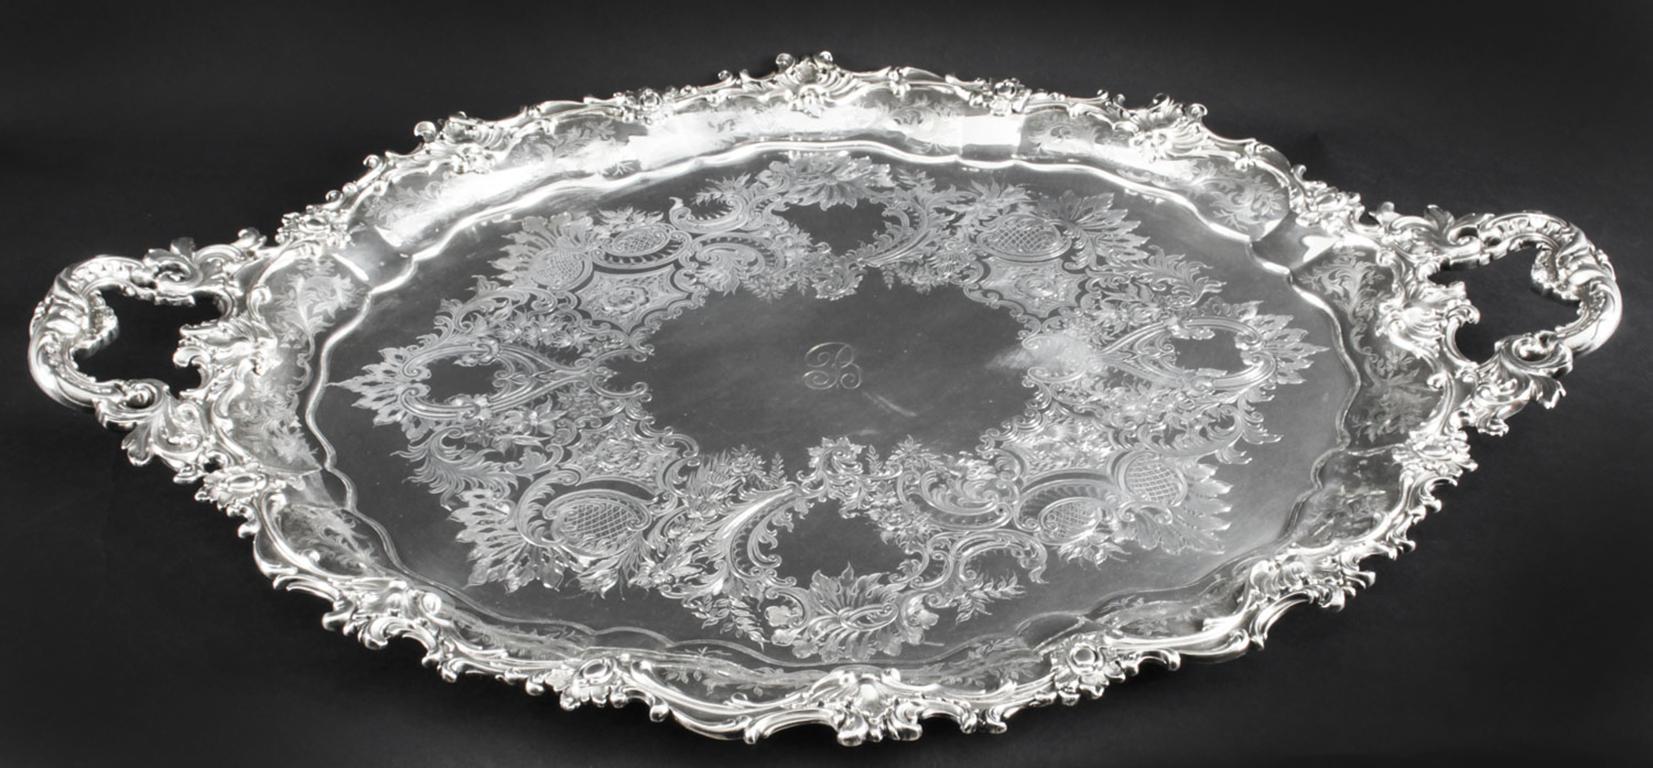 This is a magnificent antique English Victorian oval silver-plated twin handled tray by the renowned Silversmith Manoah Rhodes & Sons, Bradford, circa 1880 in date.
 
This splendid tray features beautifully engraved and embossed foliate and floral